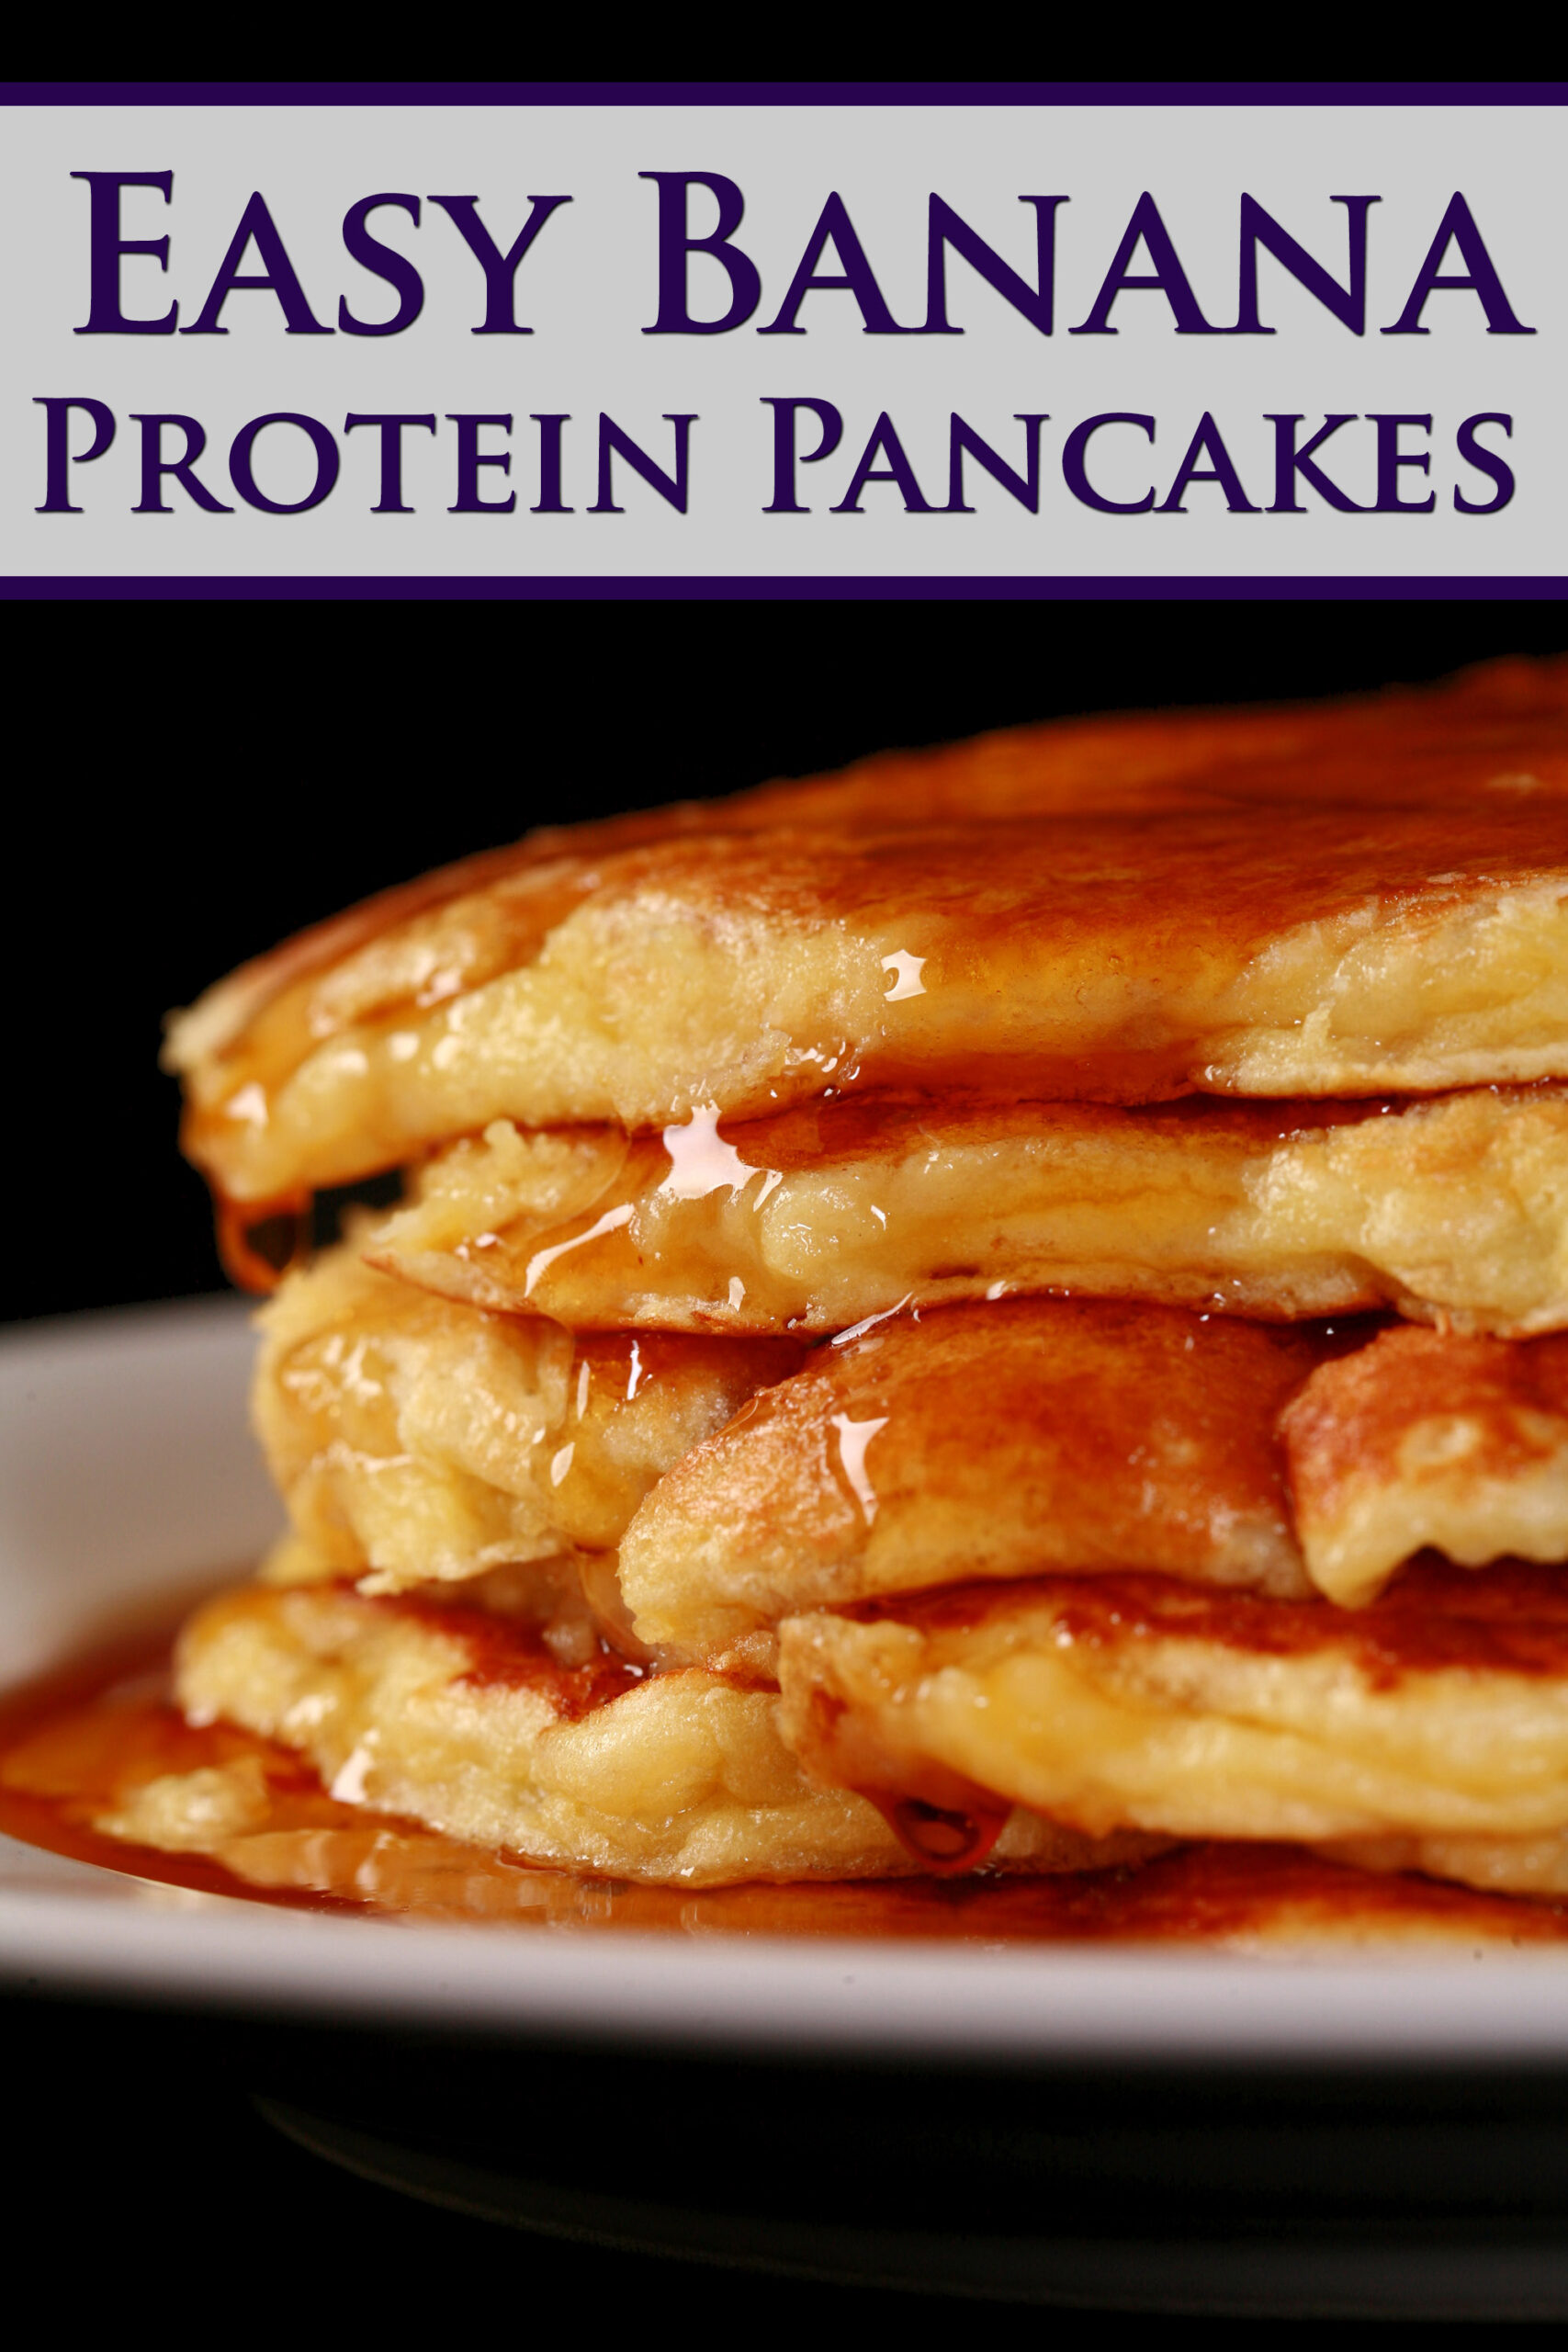 A stack of golden brown pancakes with maple syrup. Purple text says easy banana protein pancakes.